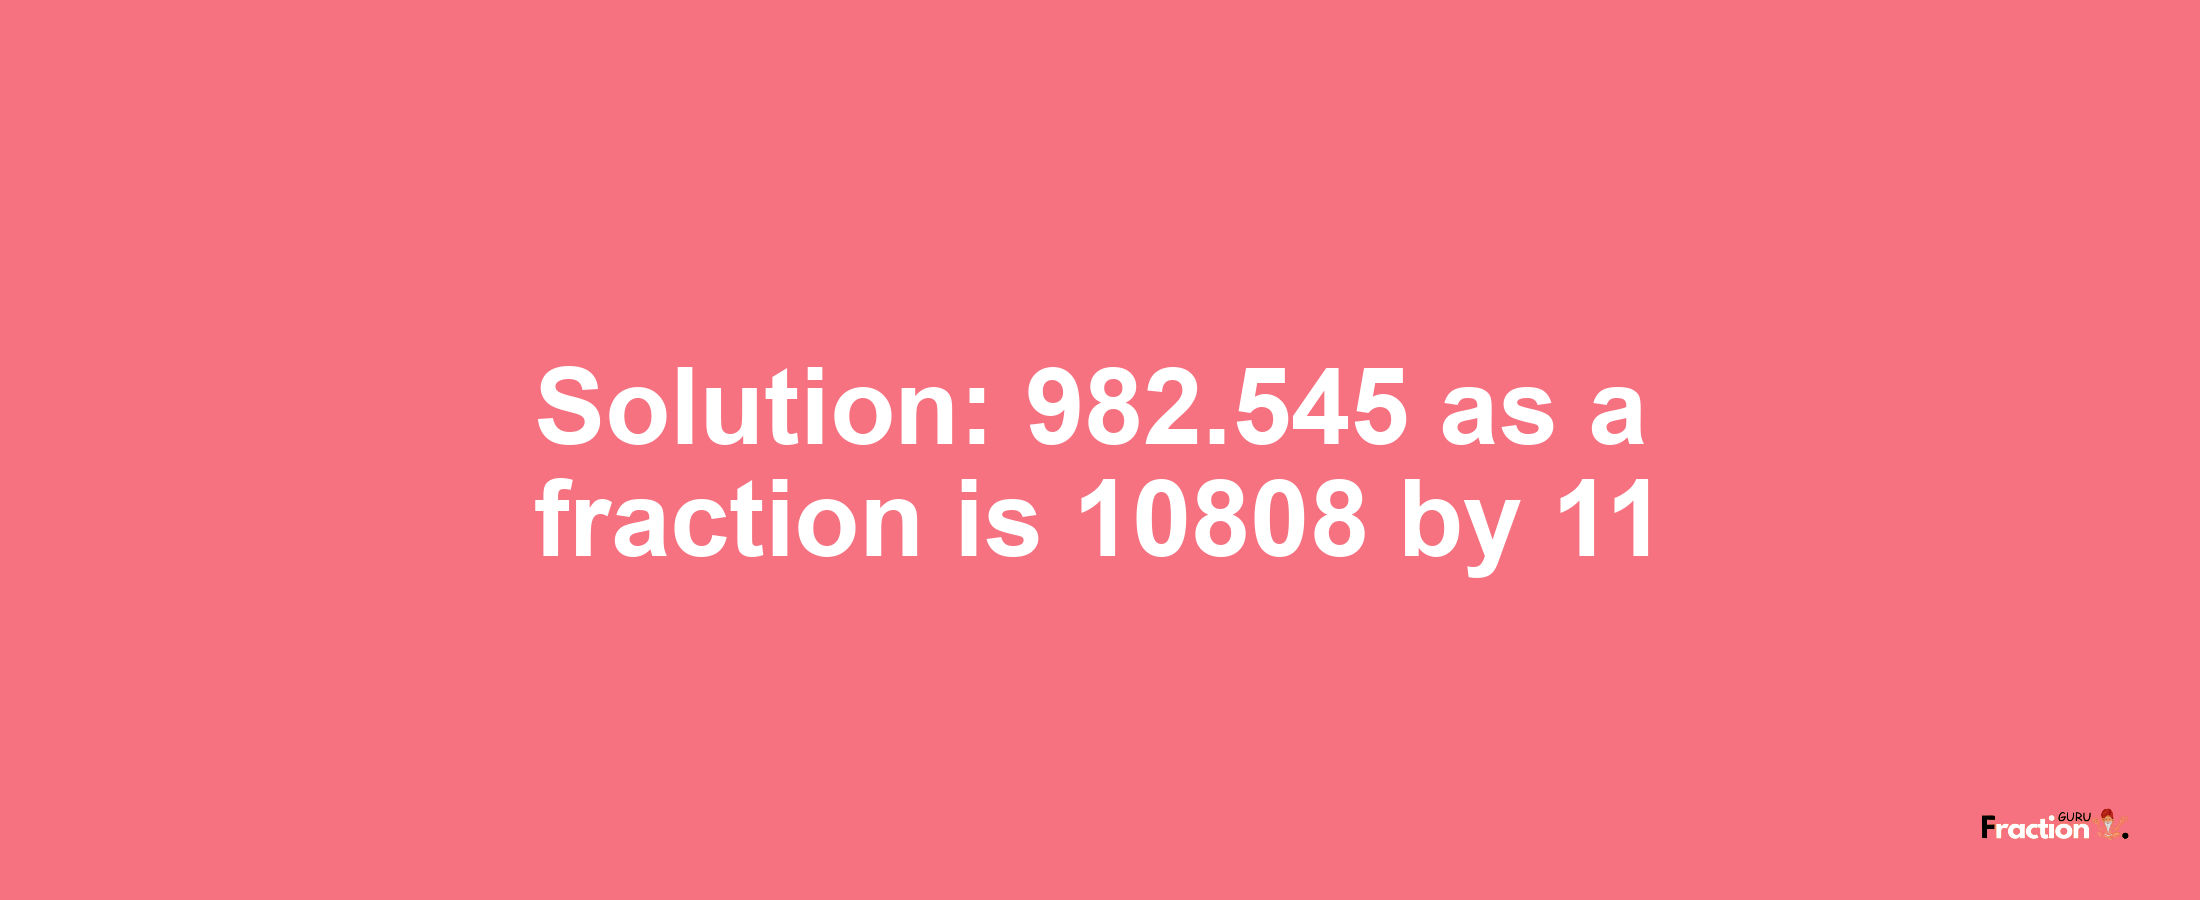 Solution:982.545 as a fraction is 10808/11